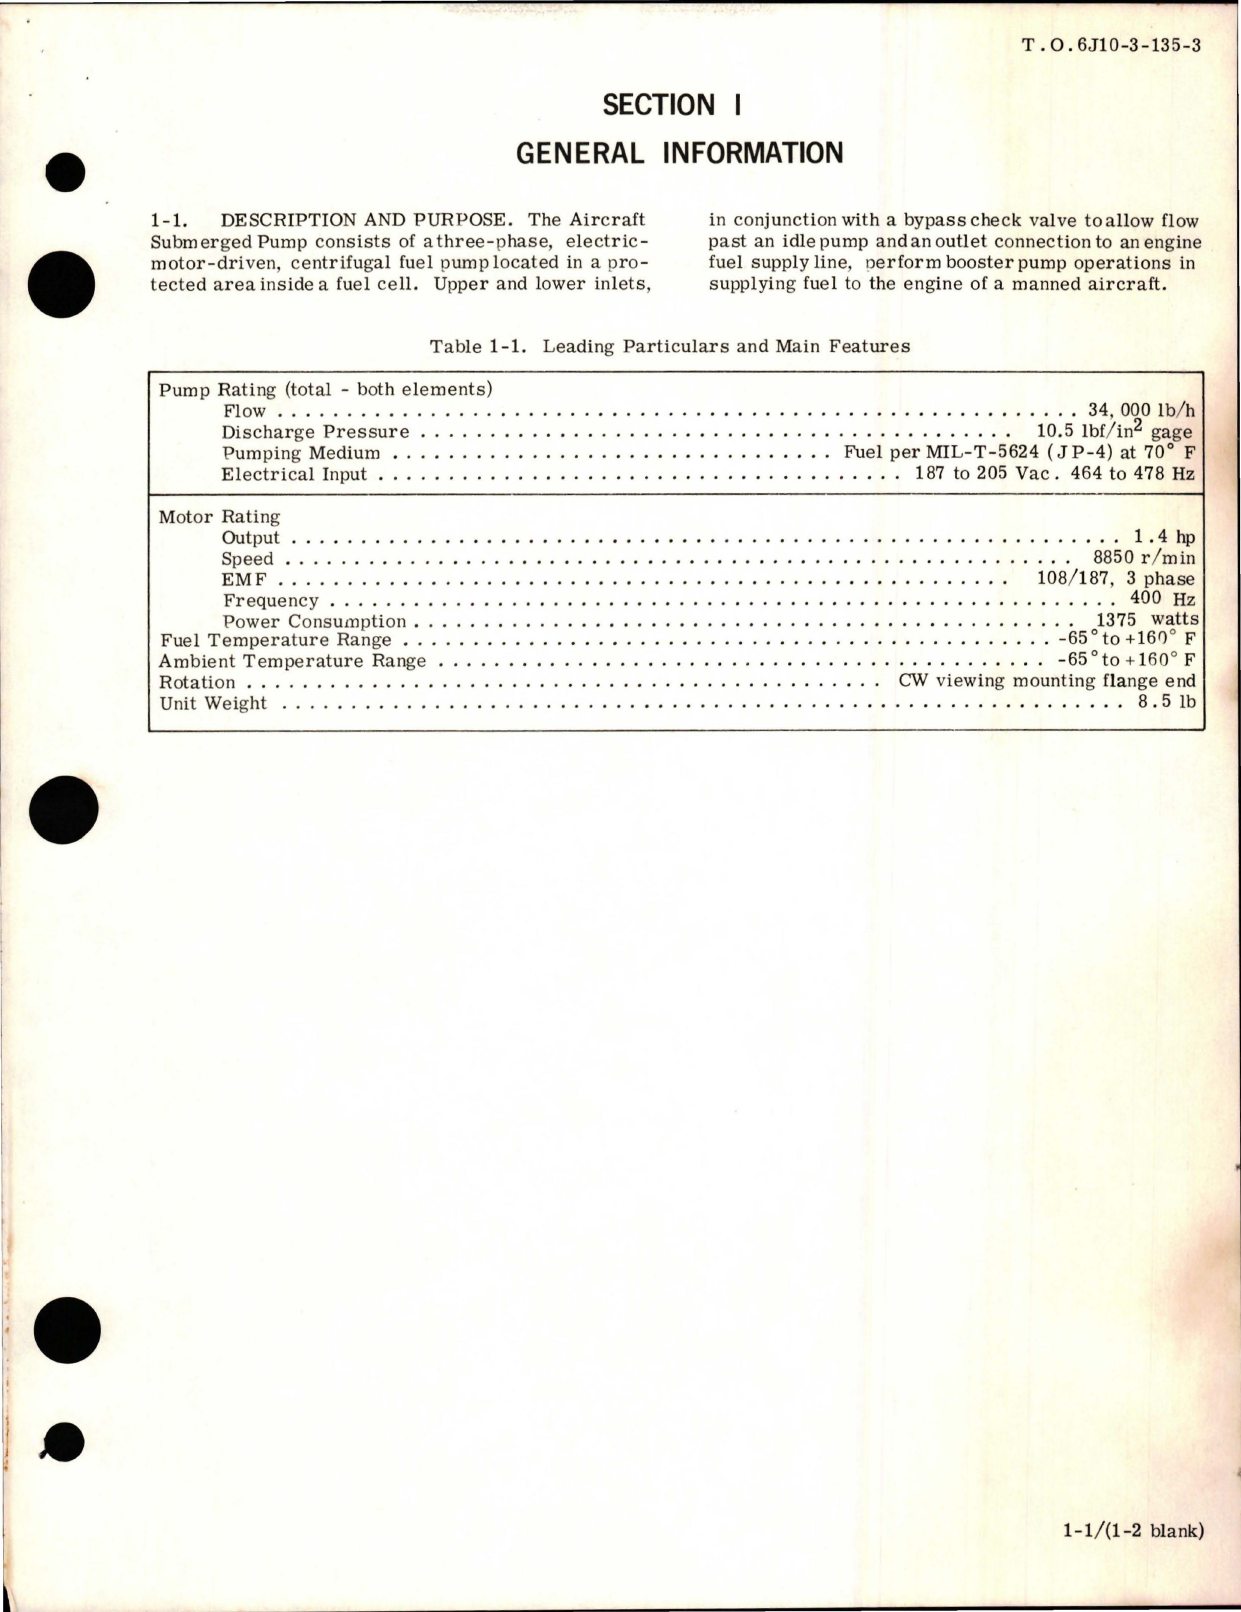 Sample page 7 from AirCorps Library document: Overhaul Instructions with Parts Breakdown for Submerged Pump - Parts RR52780, RR52780A 